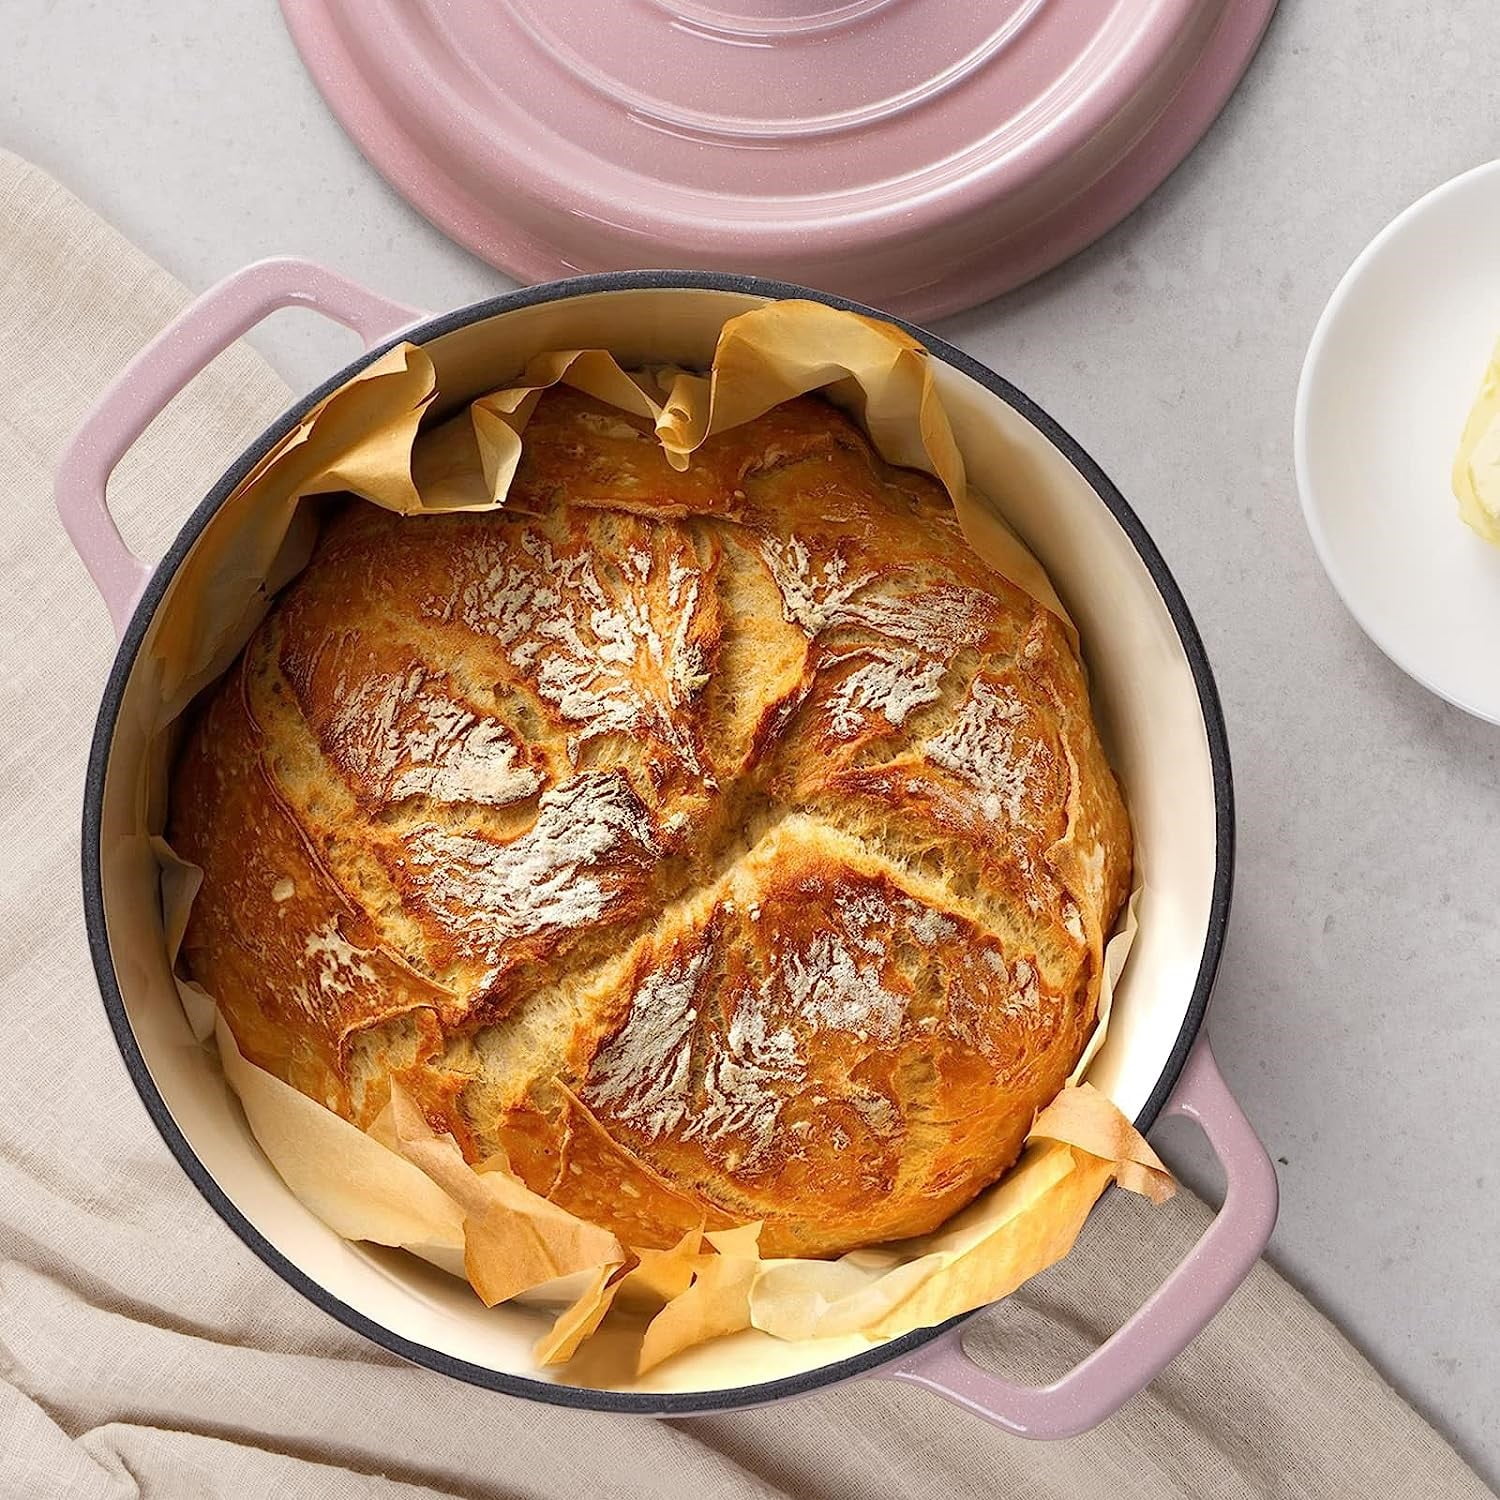 ROYDX Dutch Oven Pot with Lid, Enameled Cast Iron Coated Dutch Oven 4 QT  Deep Round Oven, Non-Stick Pan with Dual Handle for Braising Broiling Bread